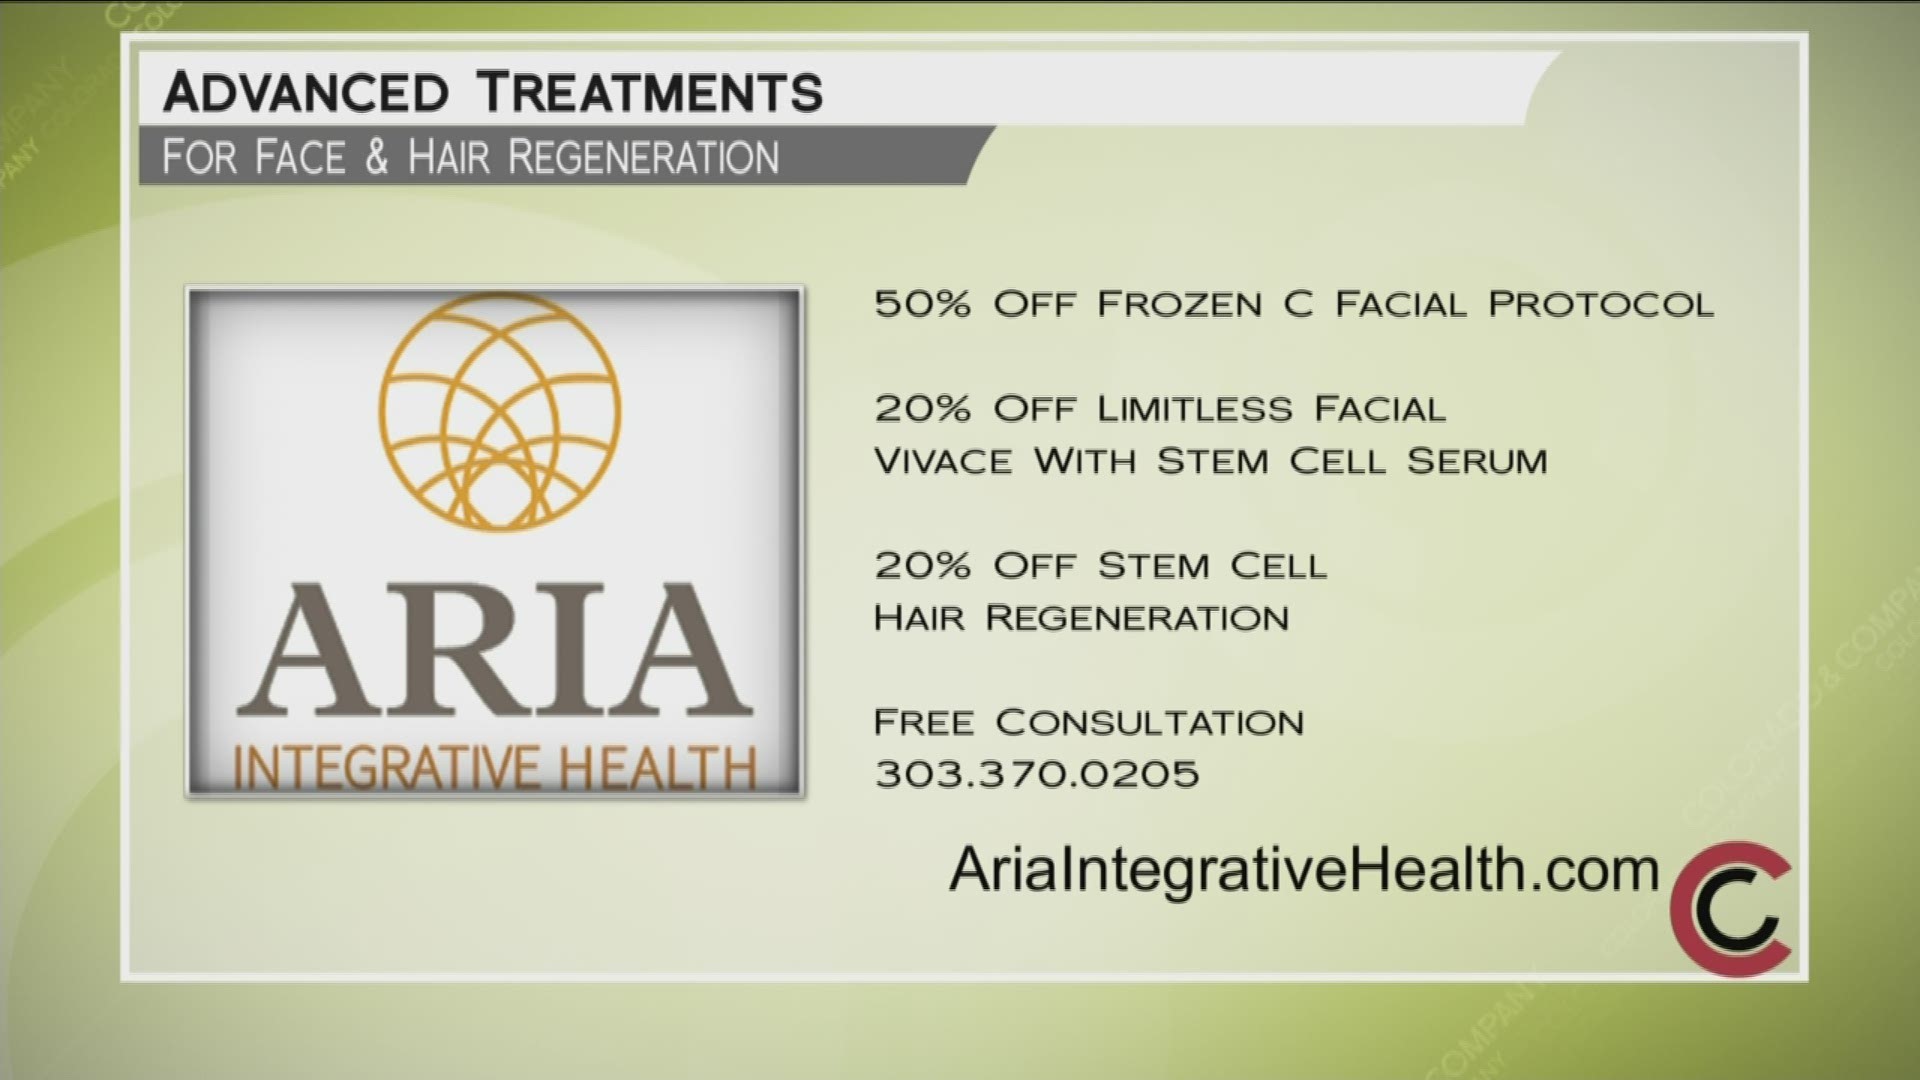 Right now, Aria is offering special pricing on several treatments. Call 303.370.0205 and ask about getting half off your Frozen C Facial protocol. The Limitless Facial using Vivace and stem cell serum is 20% off, as are hair regeneration treatments. Call now for the full menu of services. You can also check out www.AriaIntegrativeHealth.com. 
THIS INTERVIEW HAS COMMERCIAL CONTENT. PRODUCTS AND SERVICES FEATURED APPEAR AS PAID ADVERTISING.